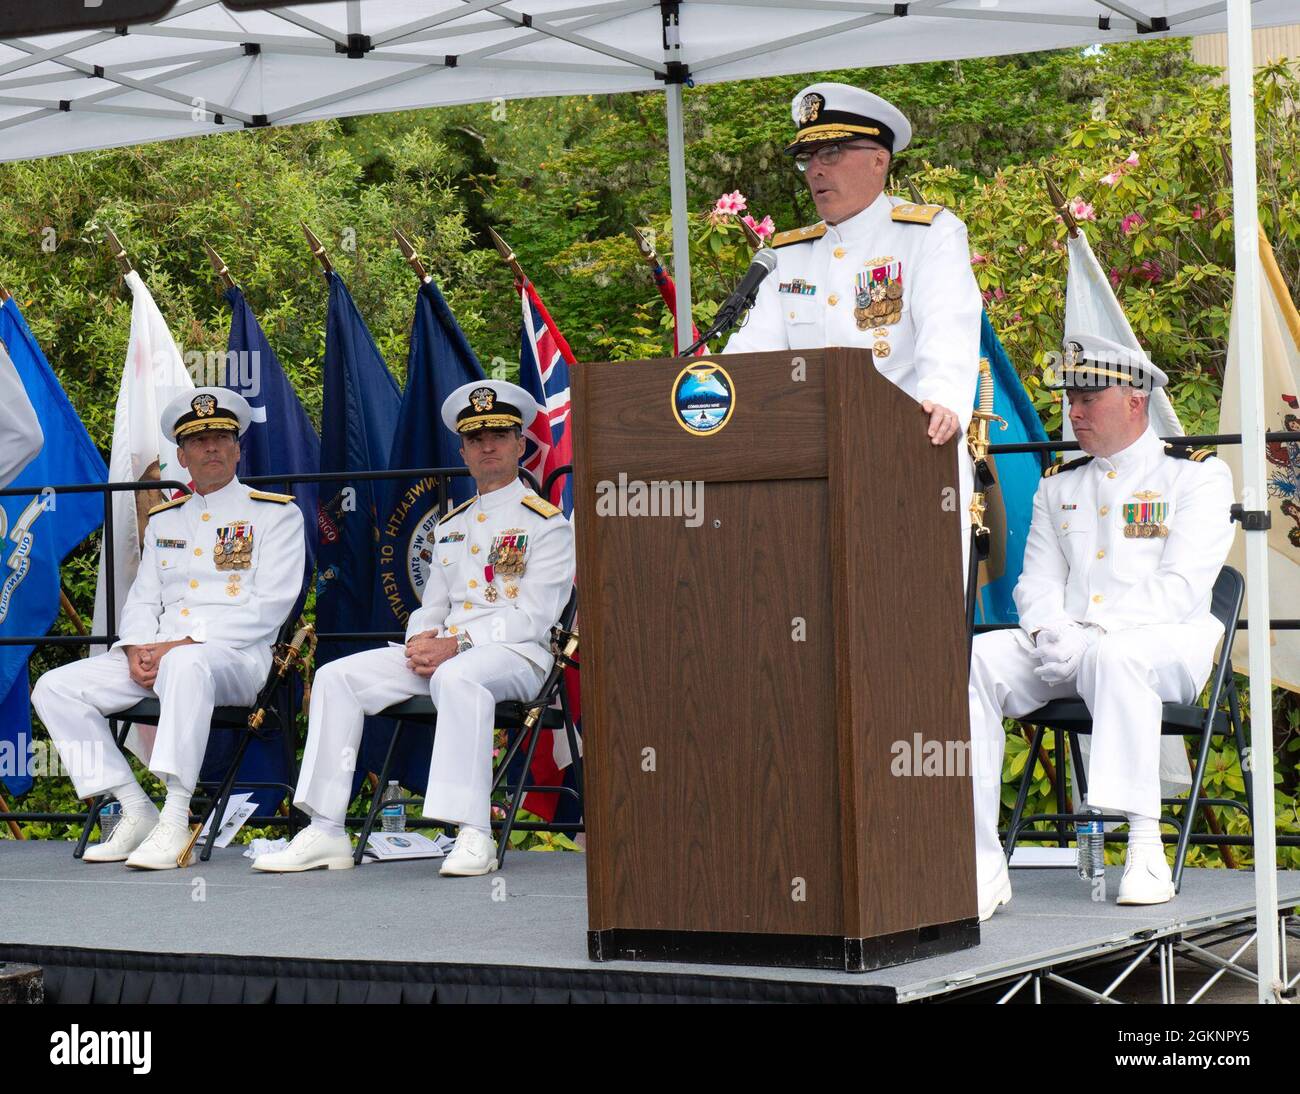 SILVERDALE, Wash. - Rear Adm. Robert Gaucher, commander, Submarine Group 9, delivers his remarks during the change of command ceremony held at Deterrent Park, Naval Base Kitsap-Bangor, June 8. Subordinate to Commander, Submarine Force, U.S. Pacific Fleet, COMSUBGRU- 9 exercises administrative, tactical and operational command and control authority for assigned Trident fleet ballistic and cruise missile submarines and subordinate commands and units in the Pacific Northwest. Subordinate commands include Submarine Squadrons 17 and 19, and Naval Submarine Support Center, Bangor. Stock Photo